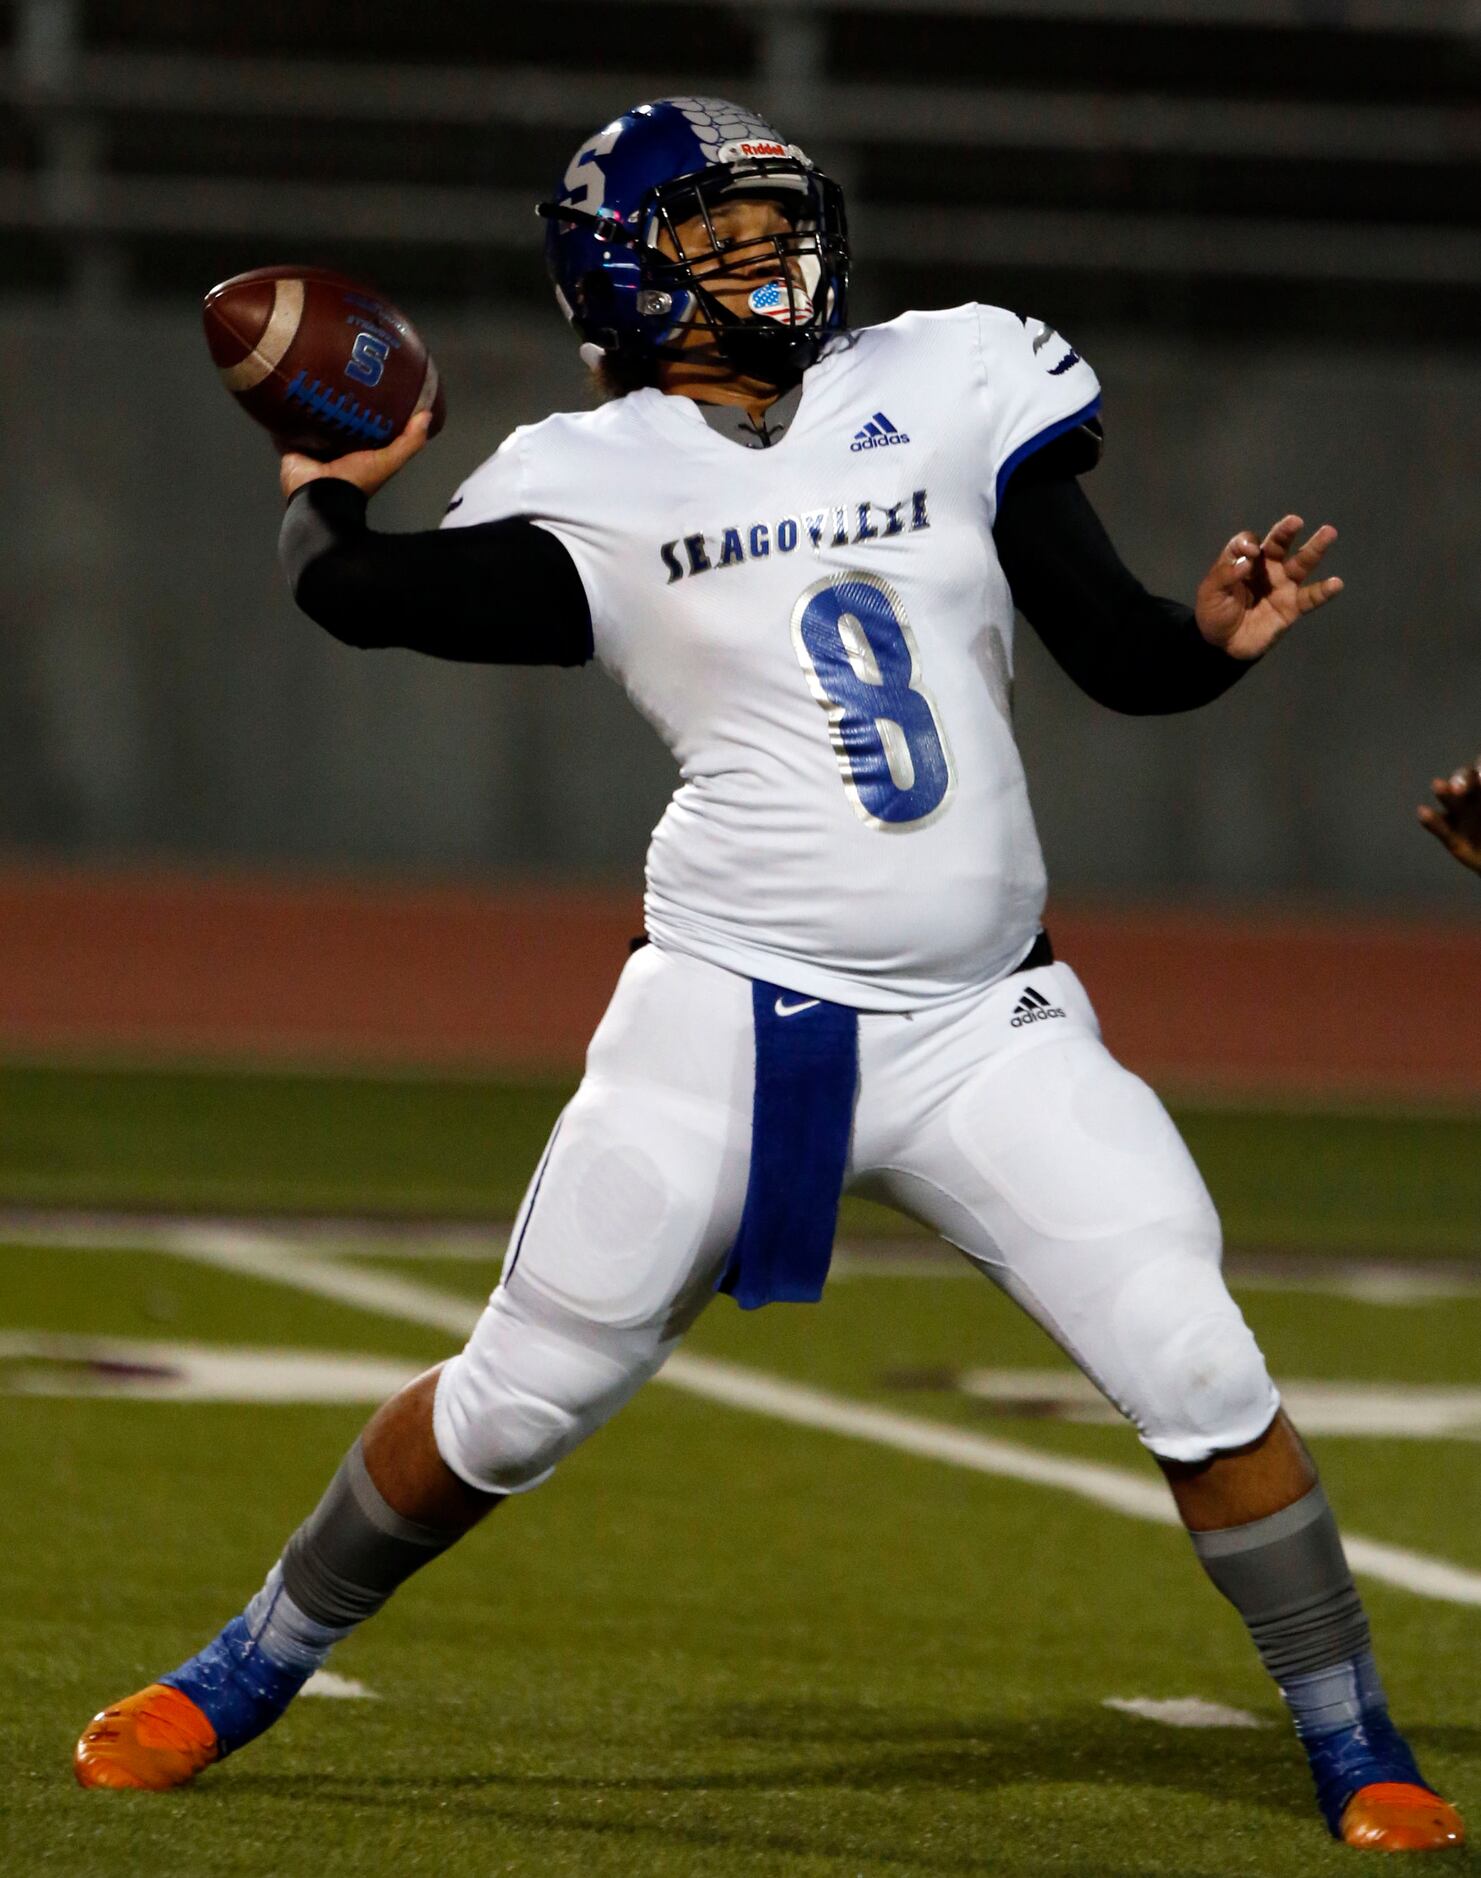 Seagoville QB Lafayette Pate (8) throws a pass during the first half of high school football...